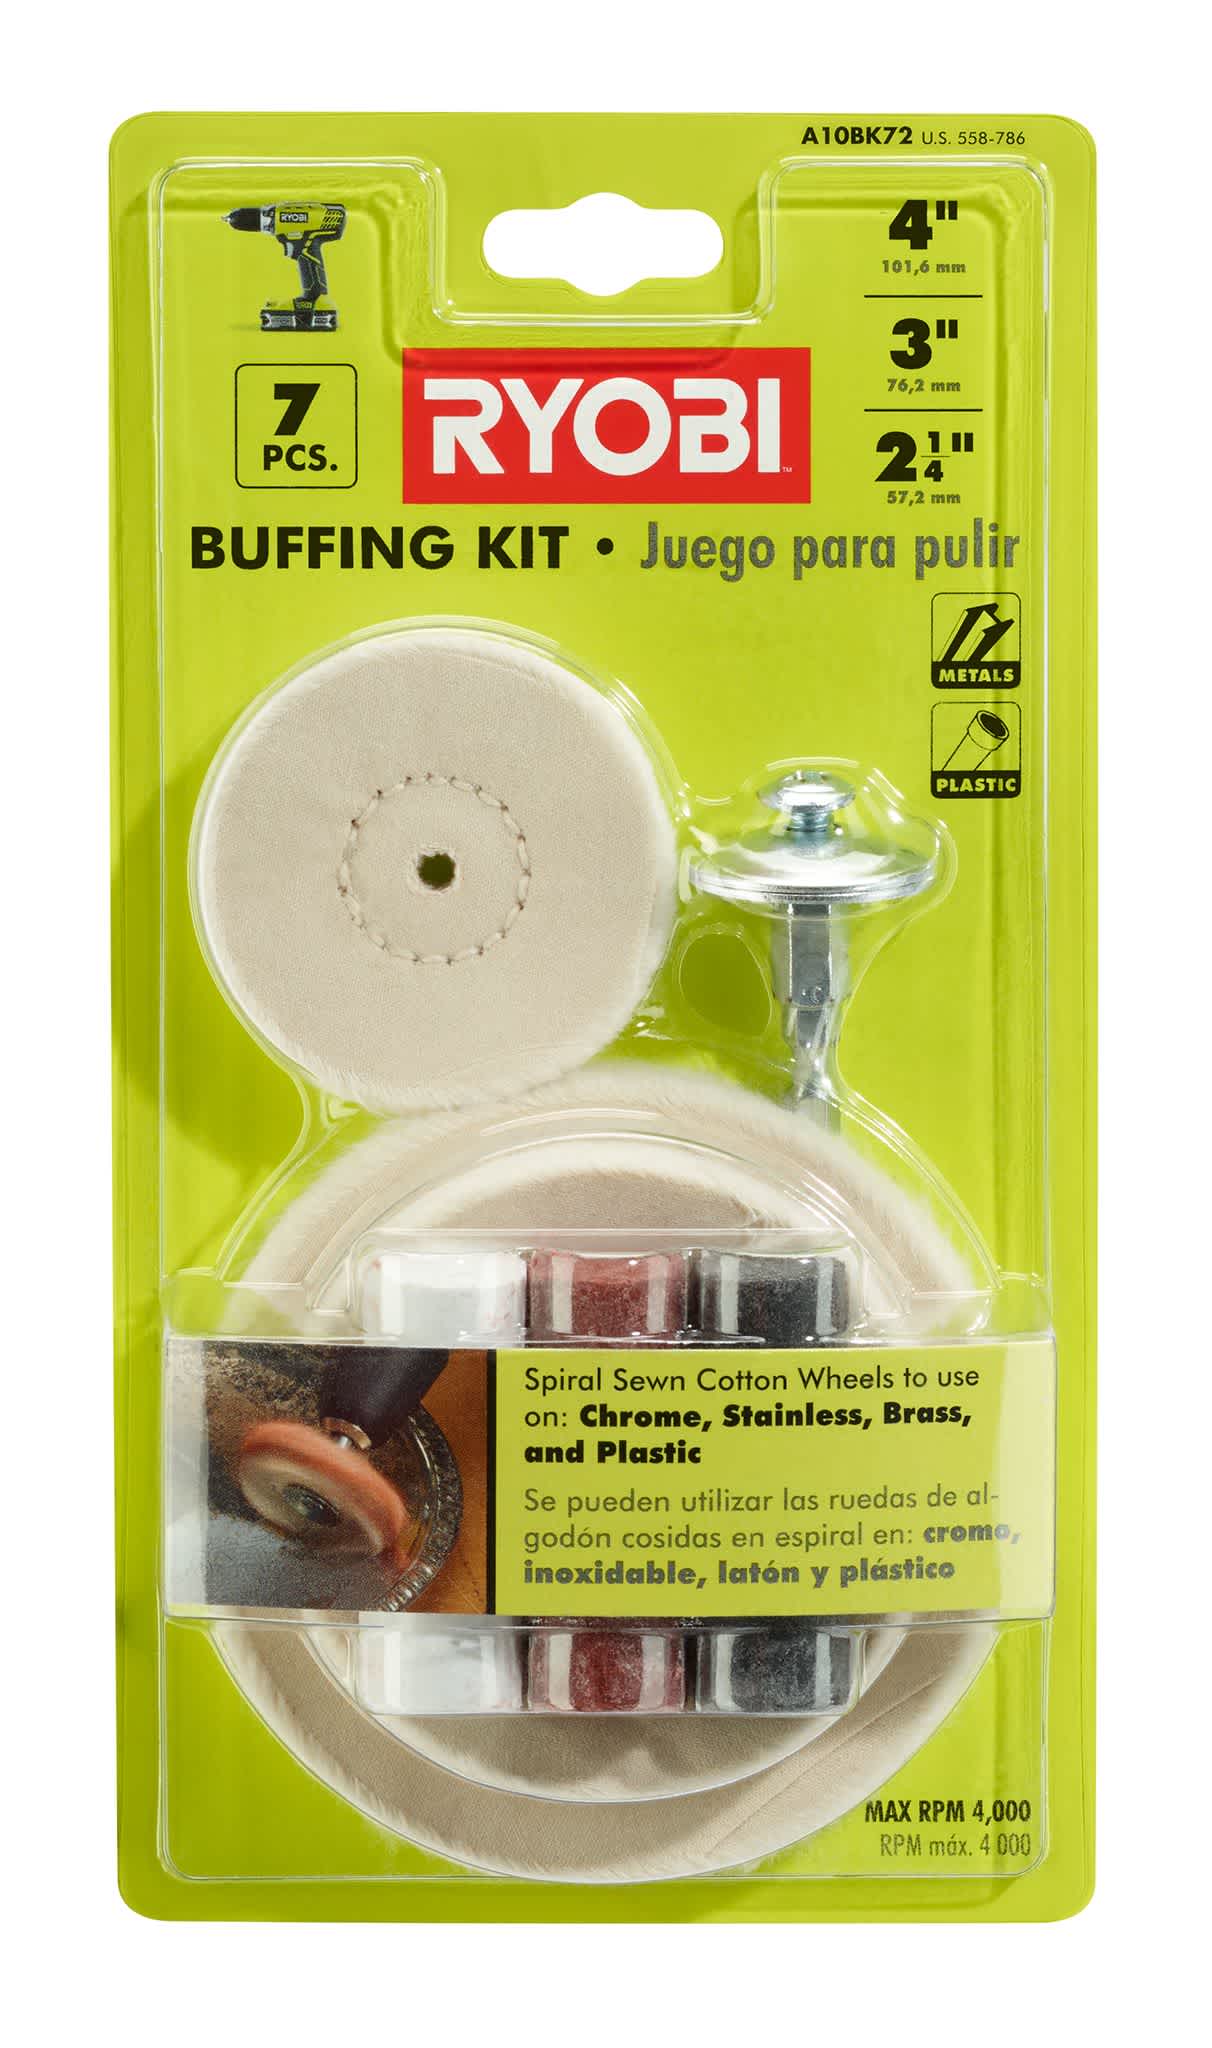 Feature Image for Metal Buffing Kit (7-Piece).